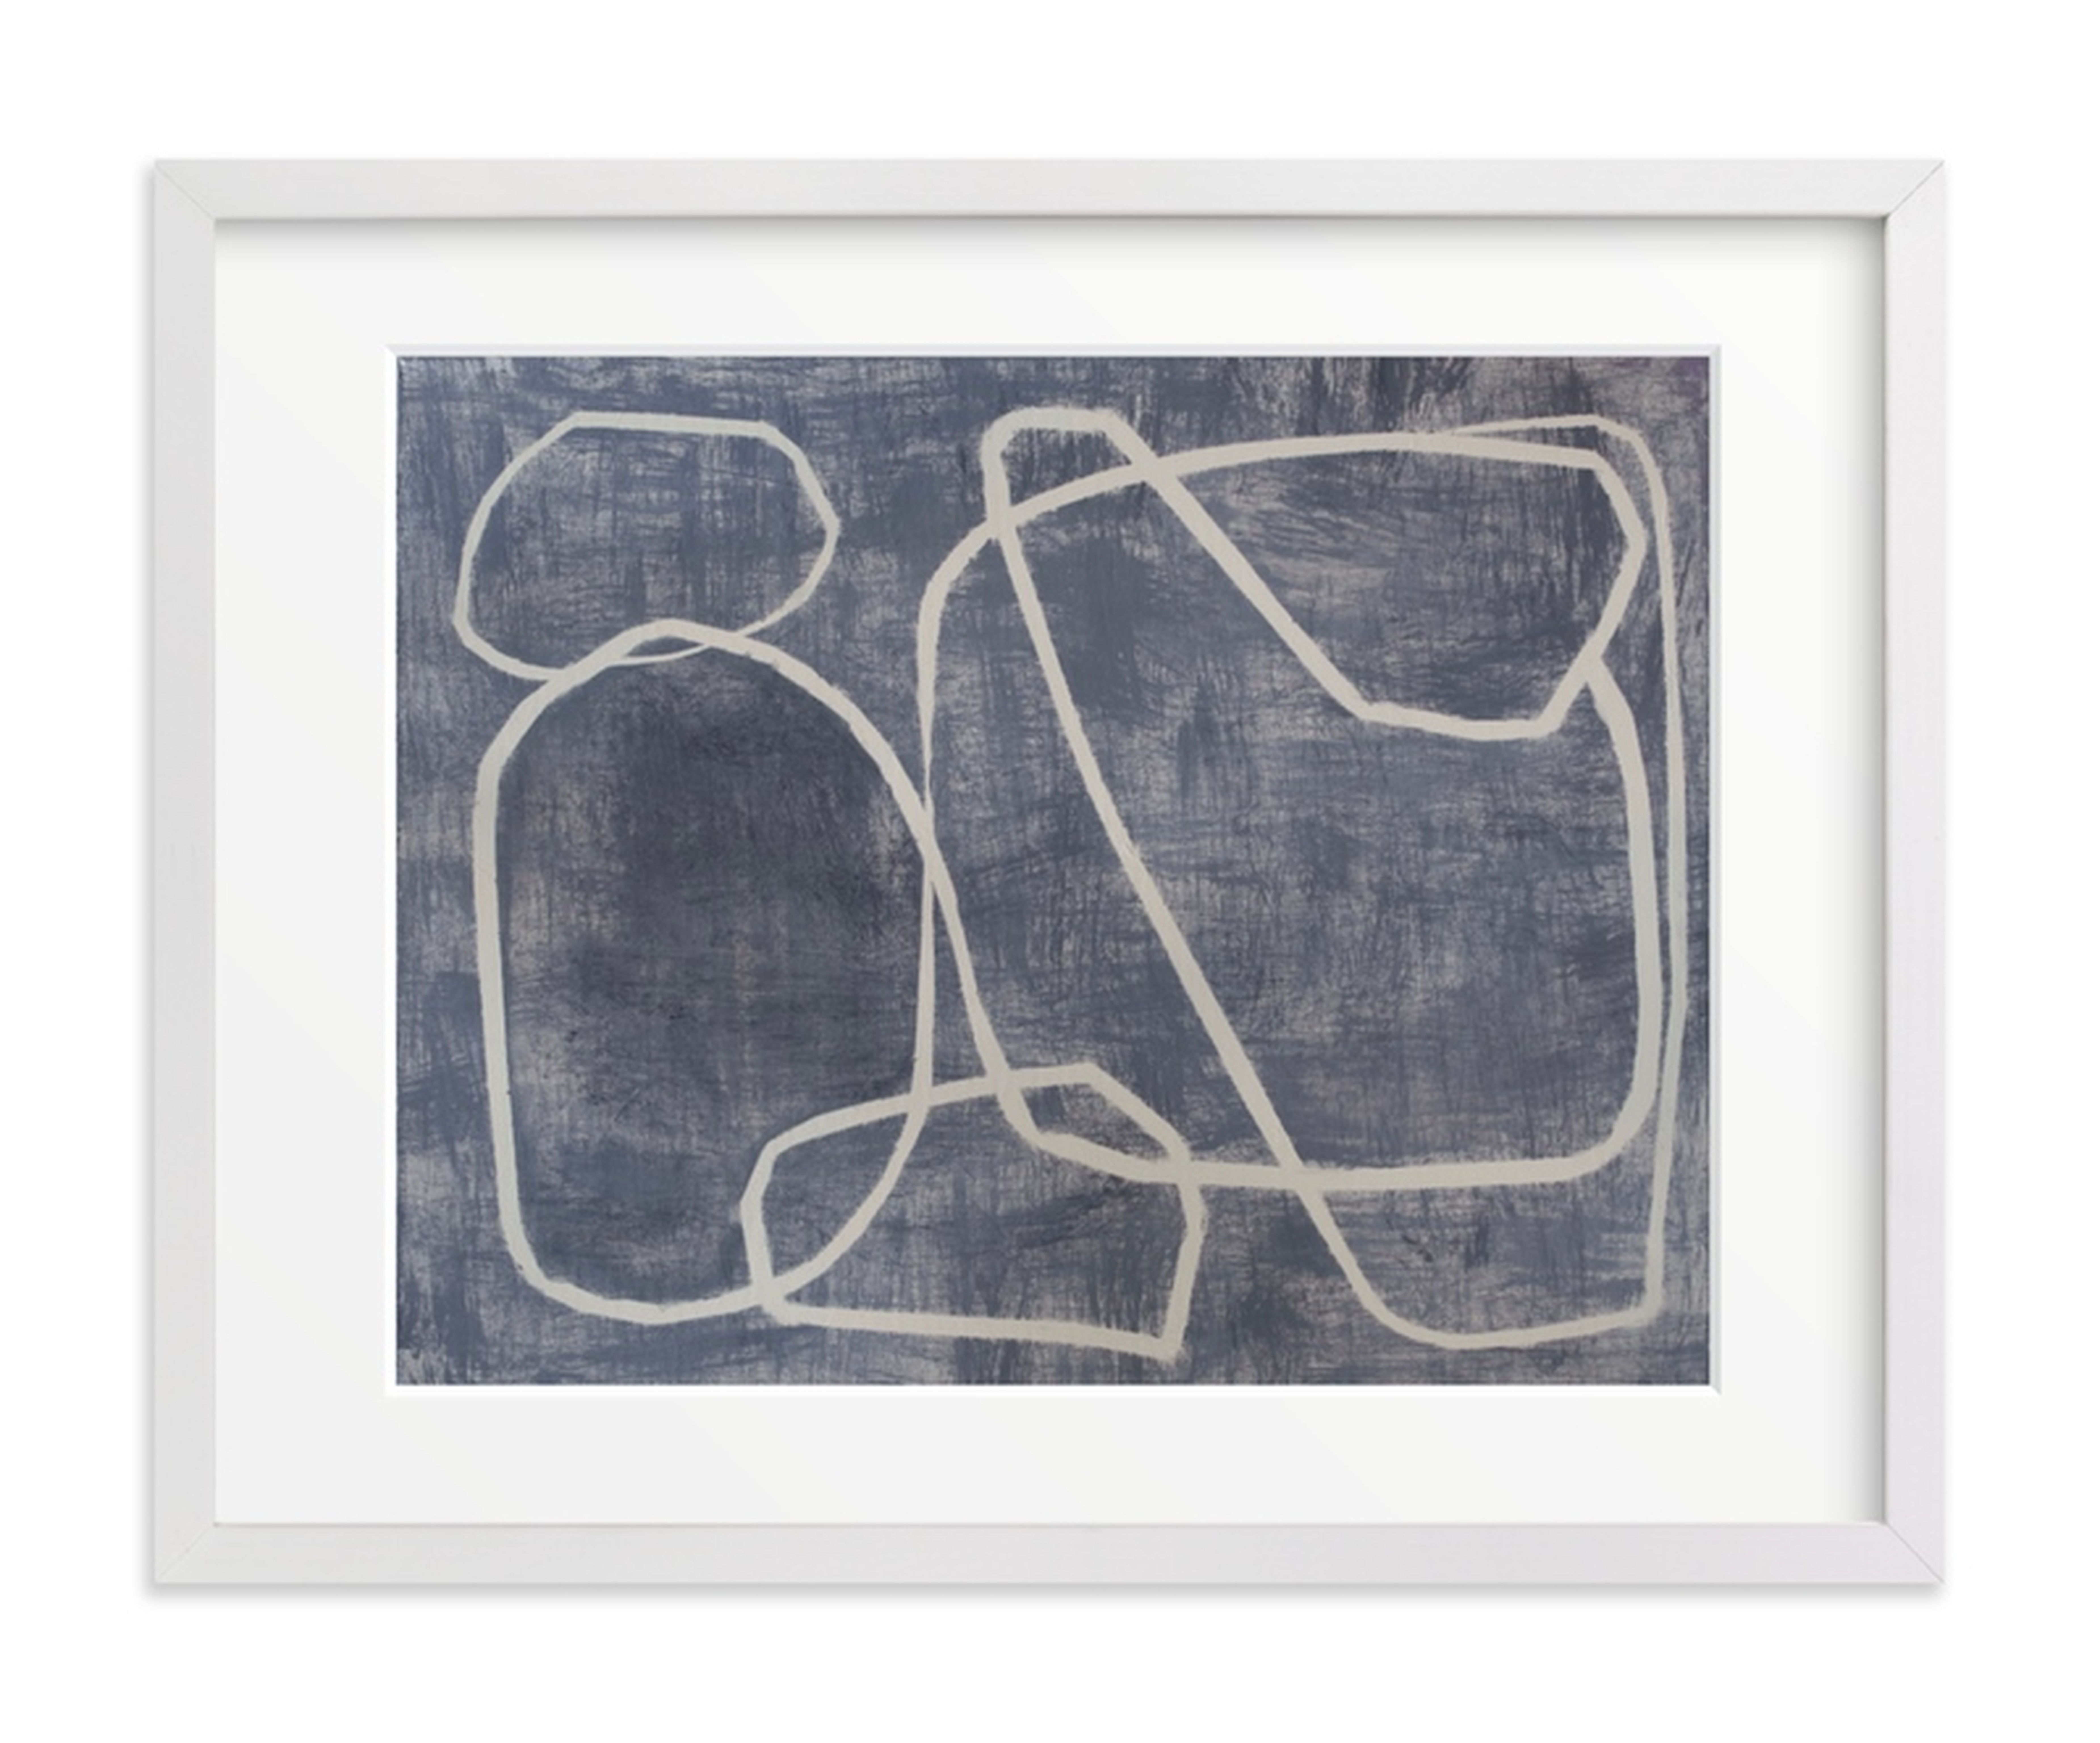 Squiggles - 14" X 11" - White Wood Frame - Matted - Minted